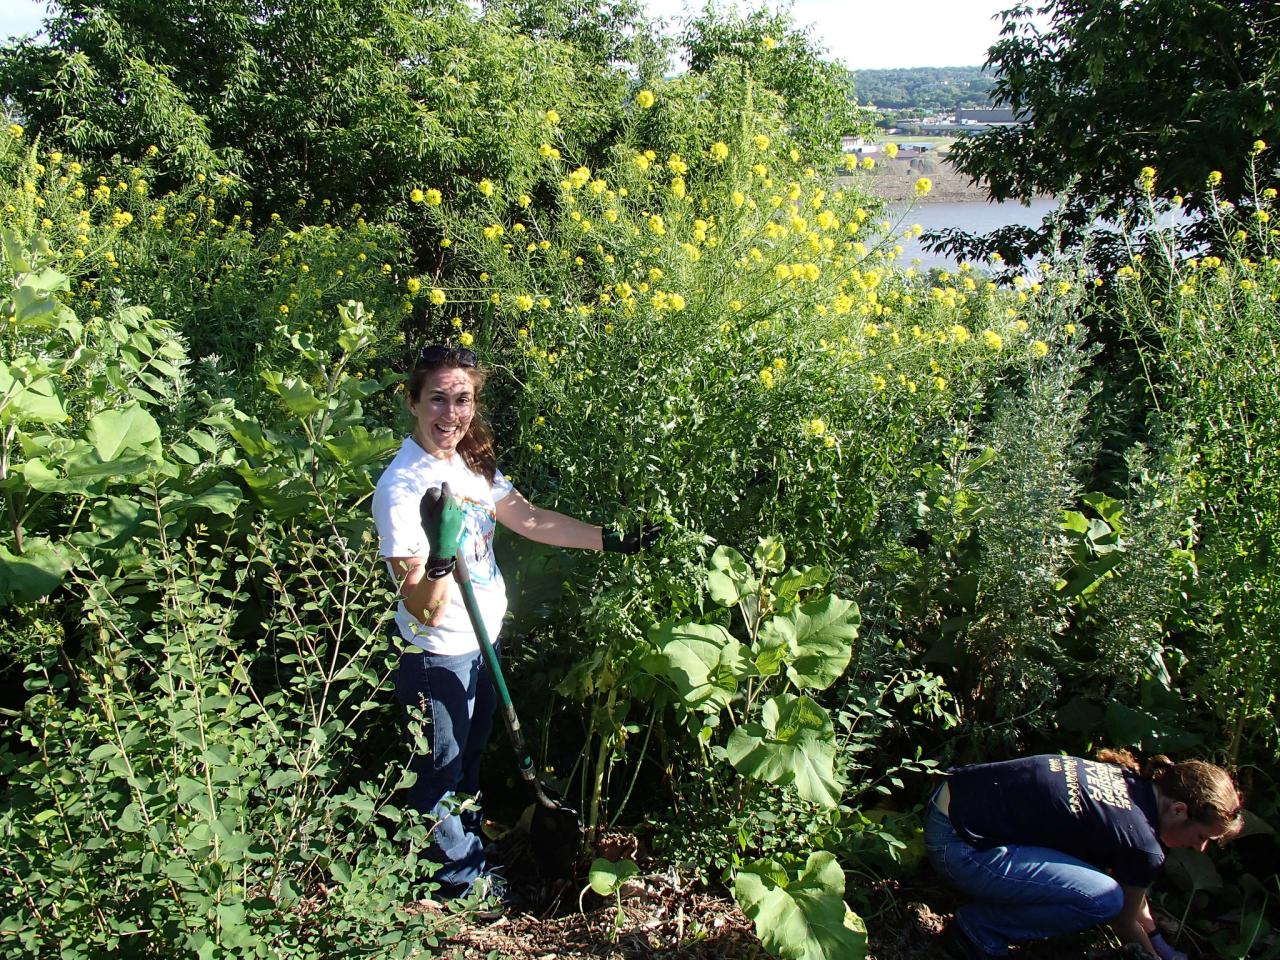 Tending plants at Indian Mounds Park